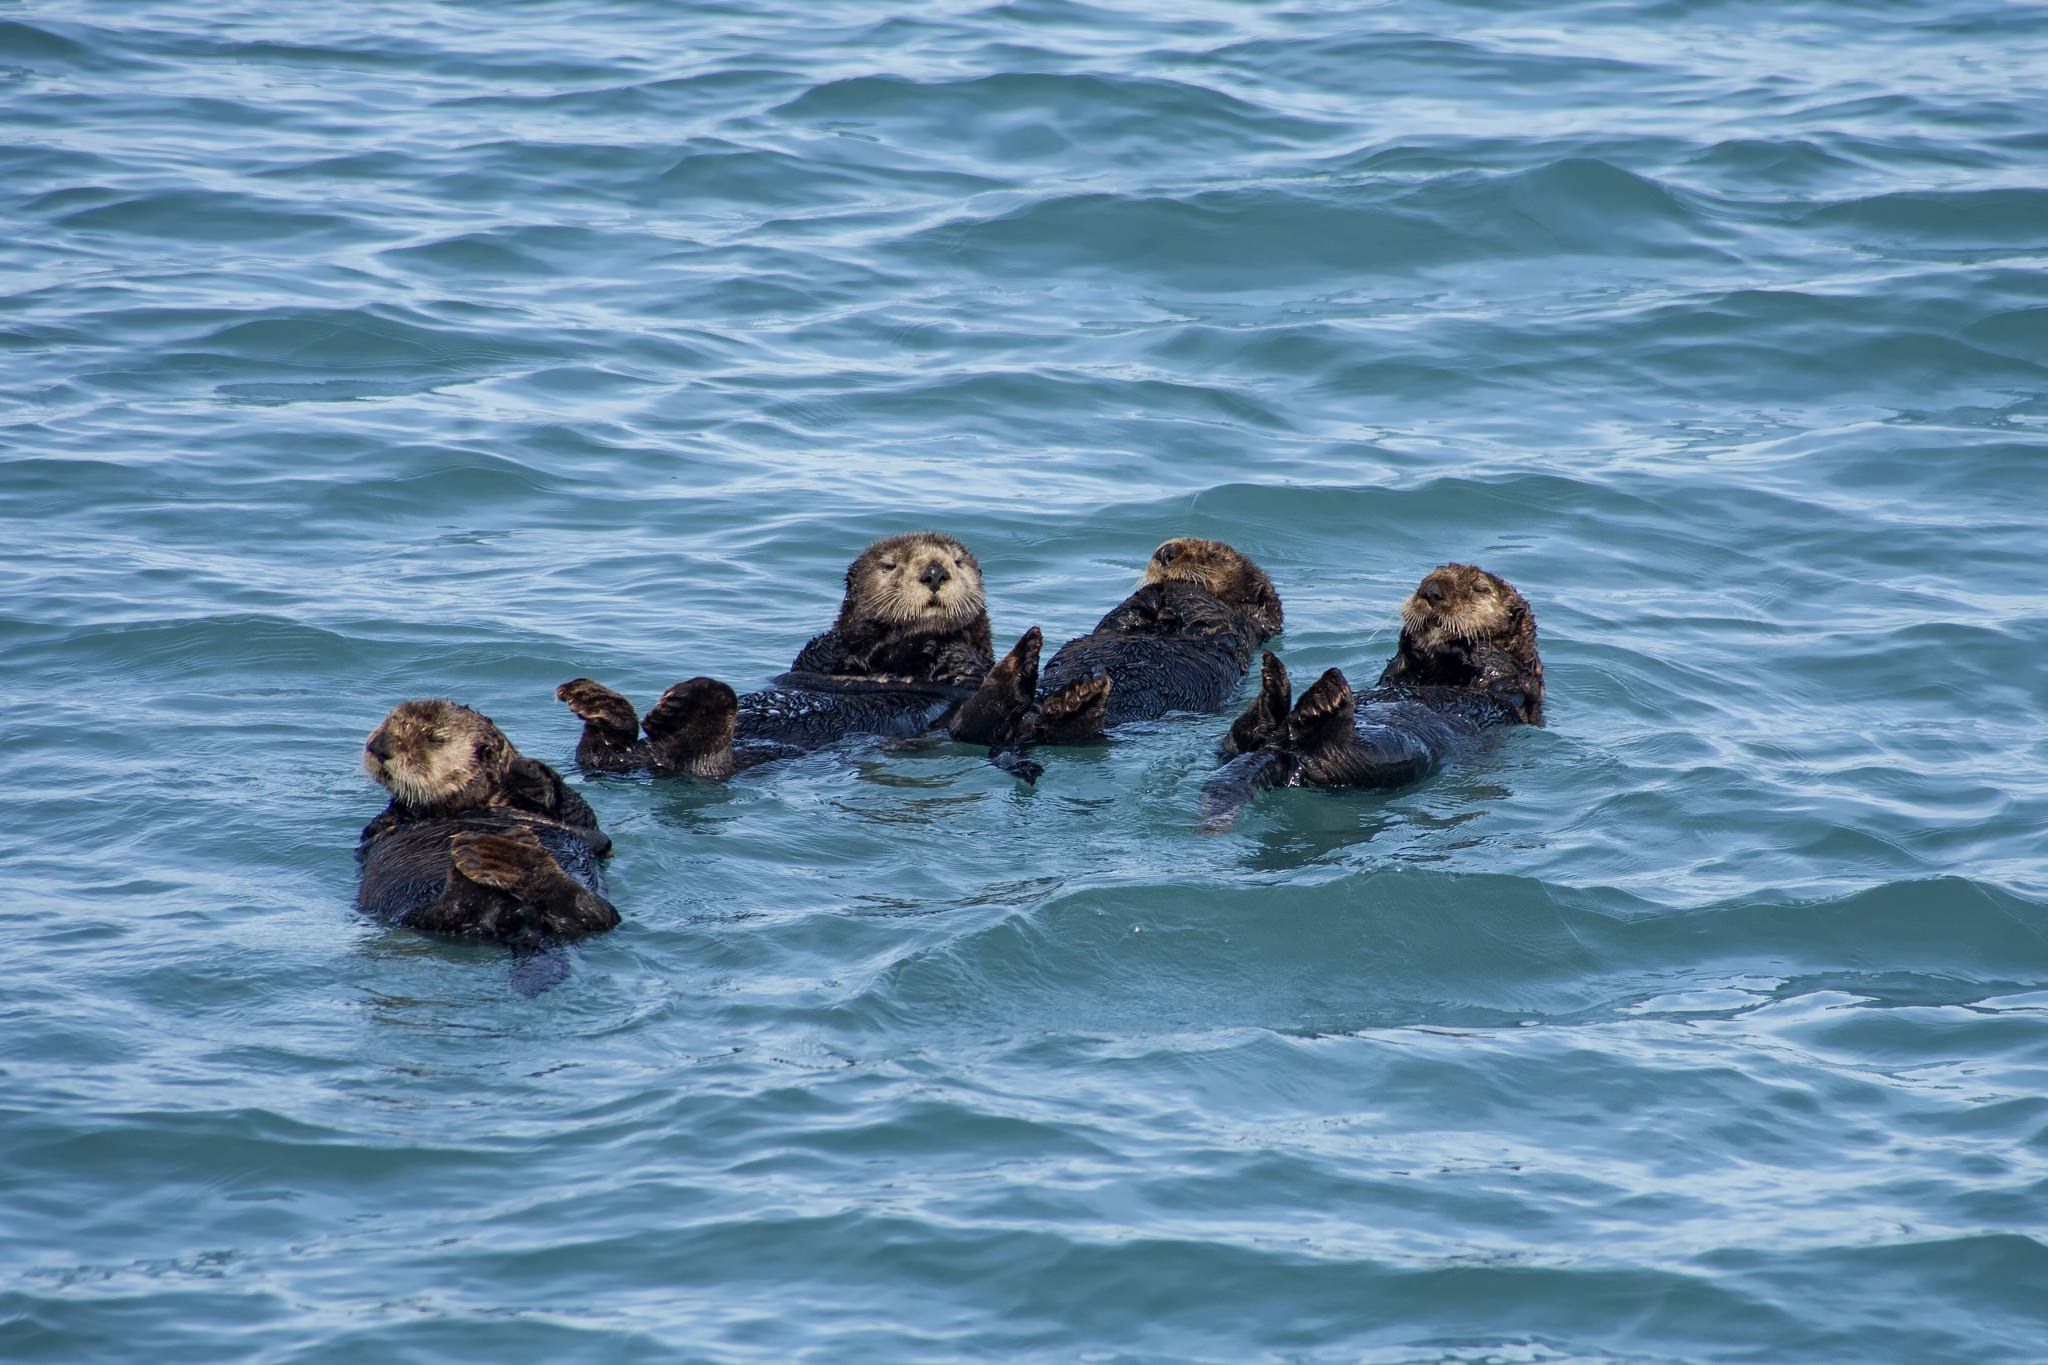 A group of sea otters in the seas off the Kenai Penninsula - the type of image that you will be able to capture during the NaturesLens Bald Eagles & Otters of Alaska Photography Holiday